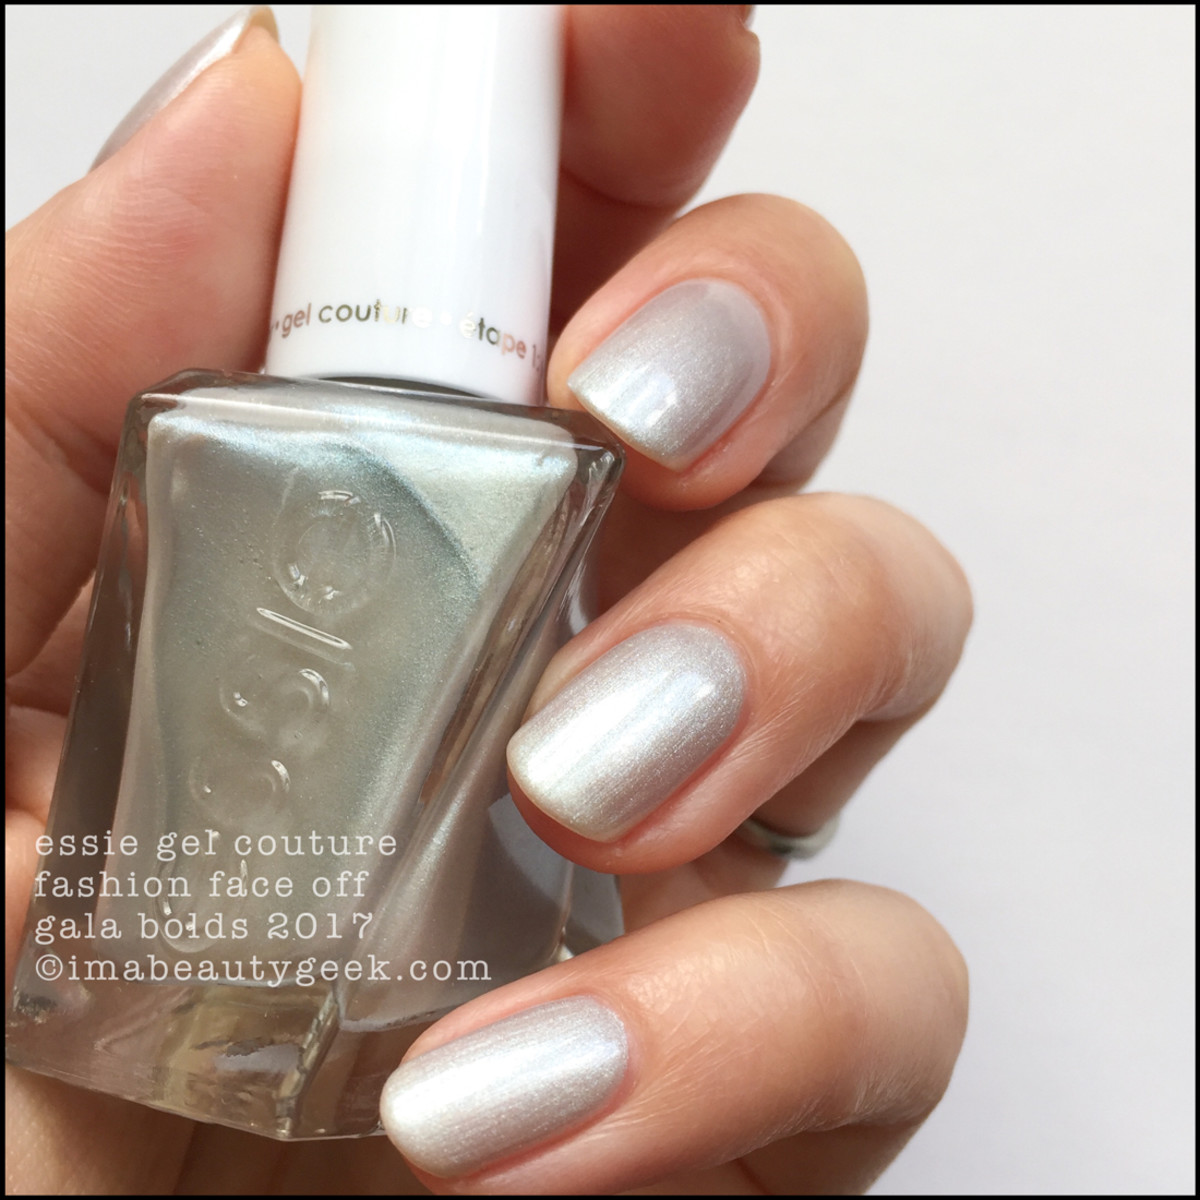 Essie Fashion Face Off Gel Couture - Gala Bolds Collection 2017